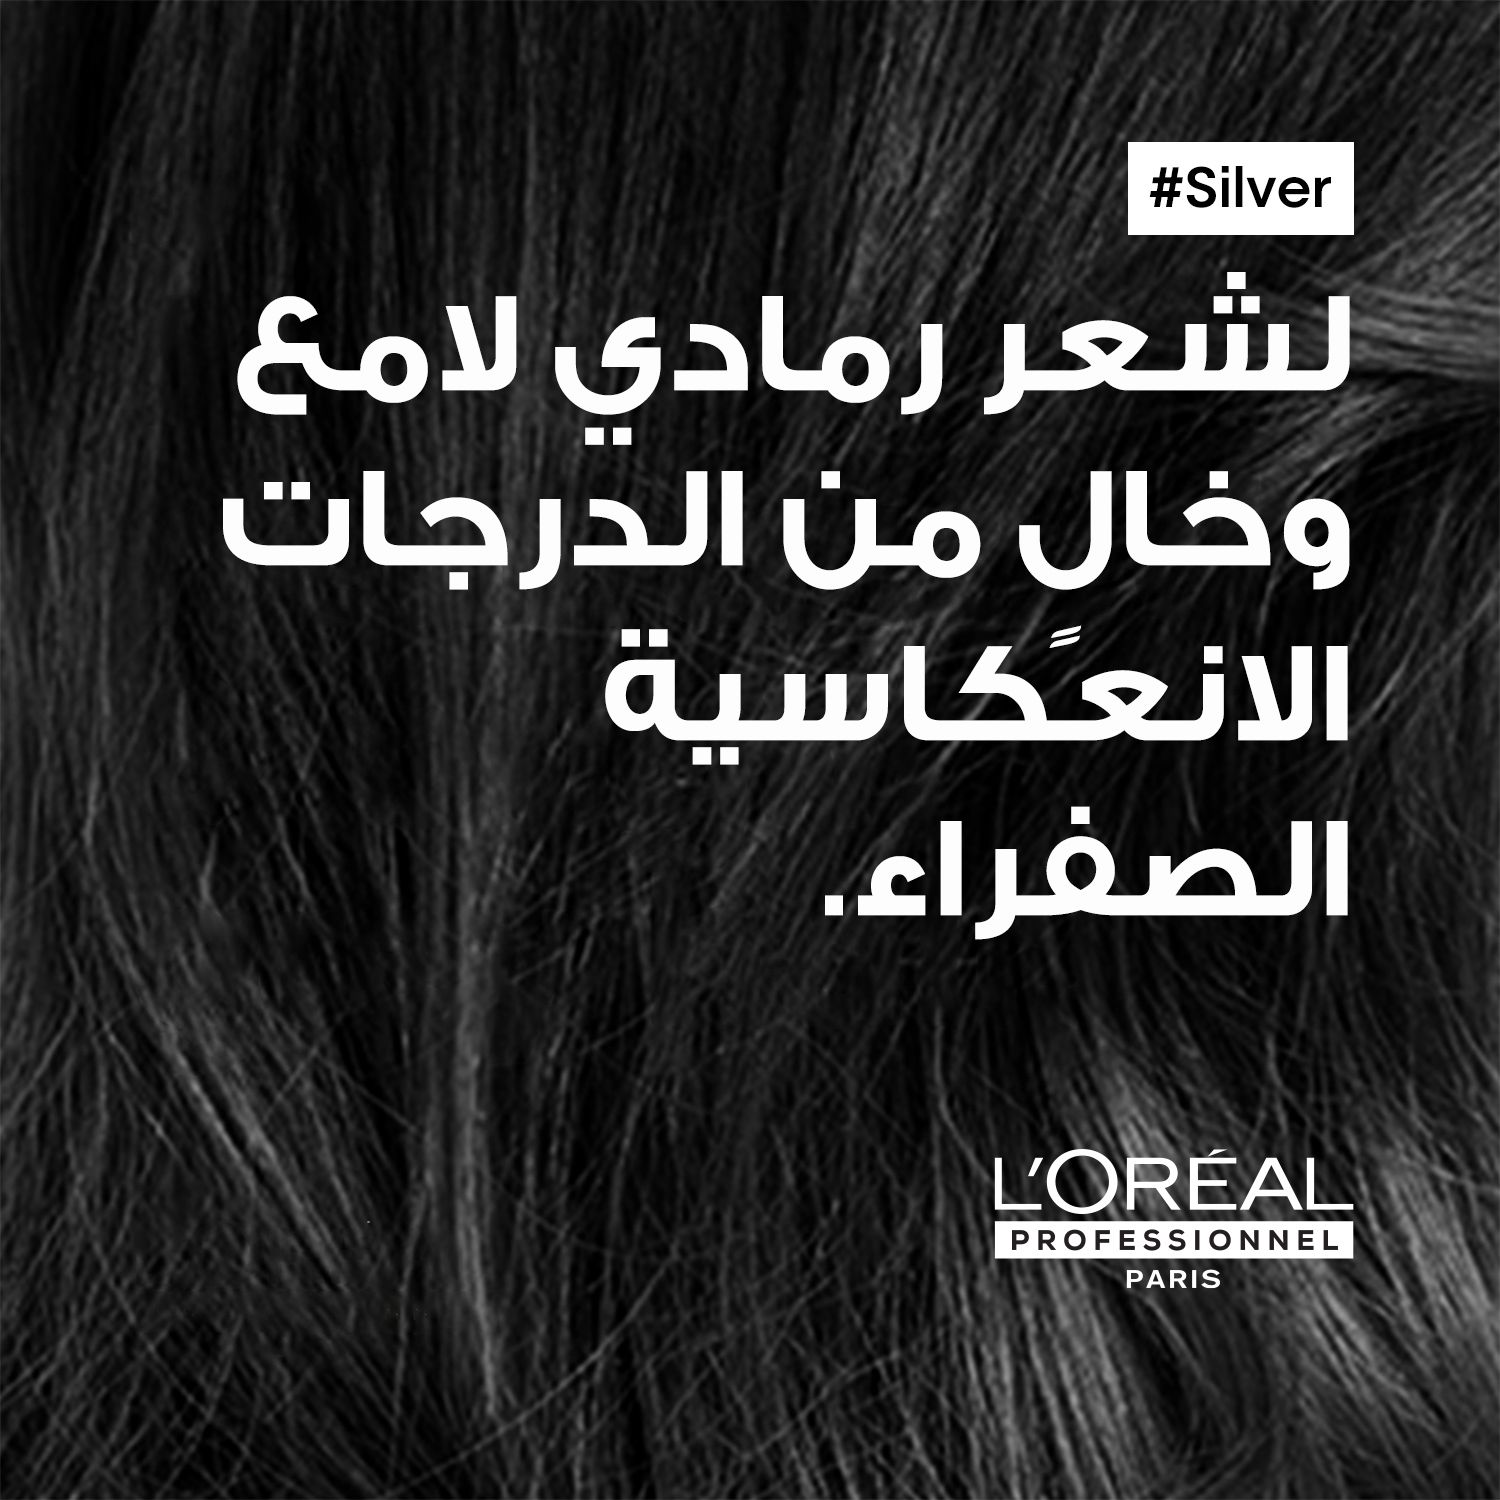 L’Oréal Professionnel Silver Conditioner for grey, white or light blonde hair SERIE EXPERT 200mL